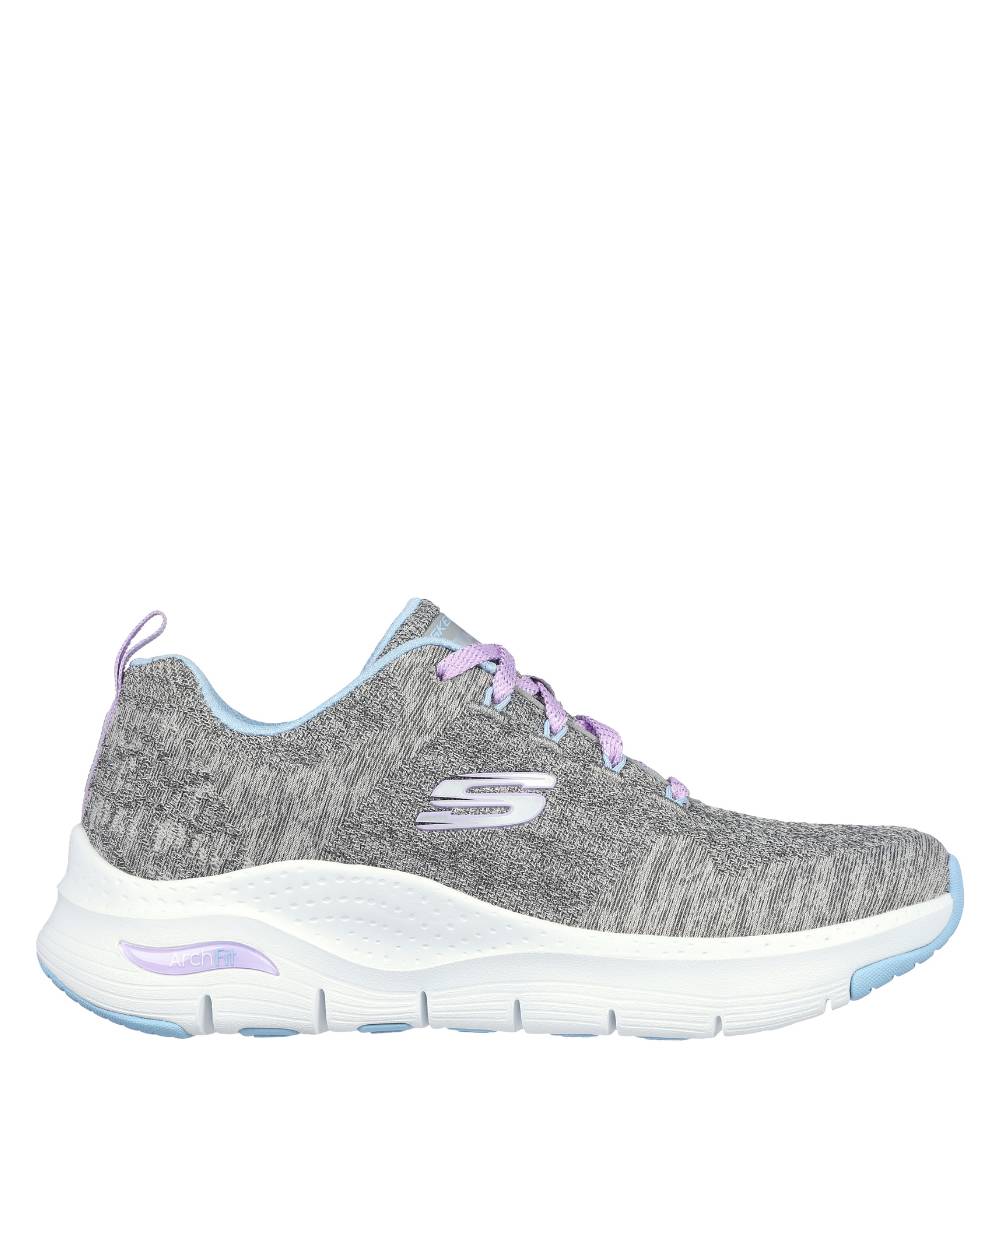 SKECHERS ARCH FIT - COMFY WAVE